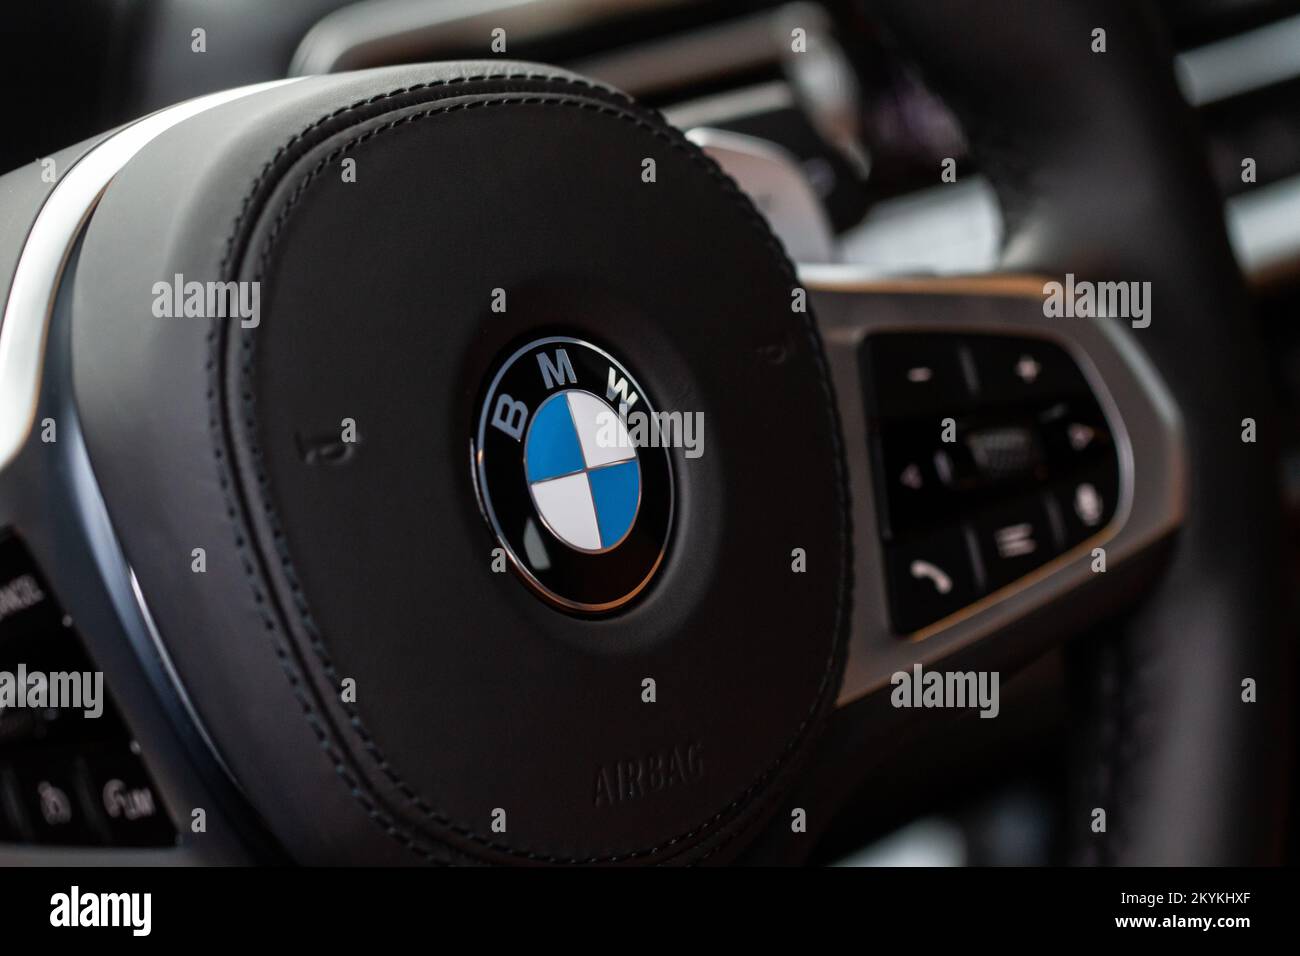 MOSCOW, RUSSIA - FEBRUARY 05, 2022 BMW X3 steering wheel close up view. BMW logo on the car steering wheel. Compact luxury crossover SUV Stock Photo